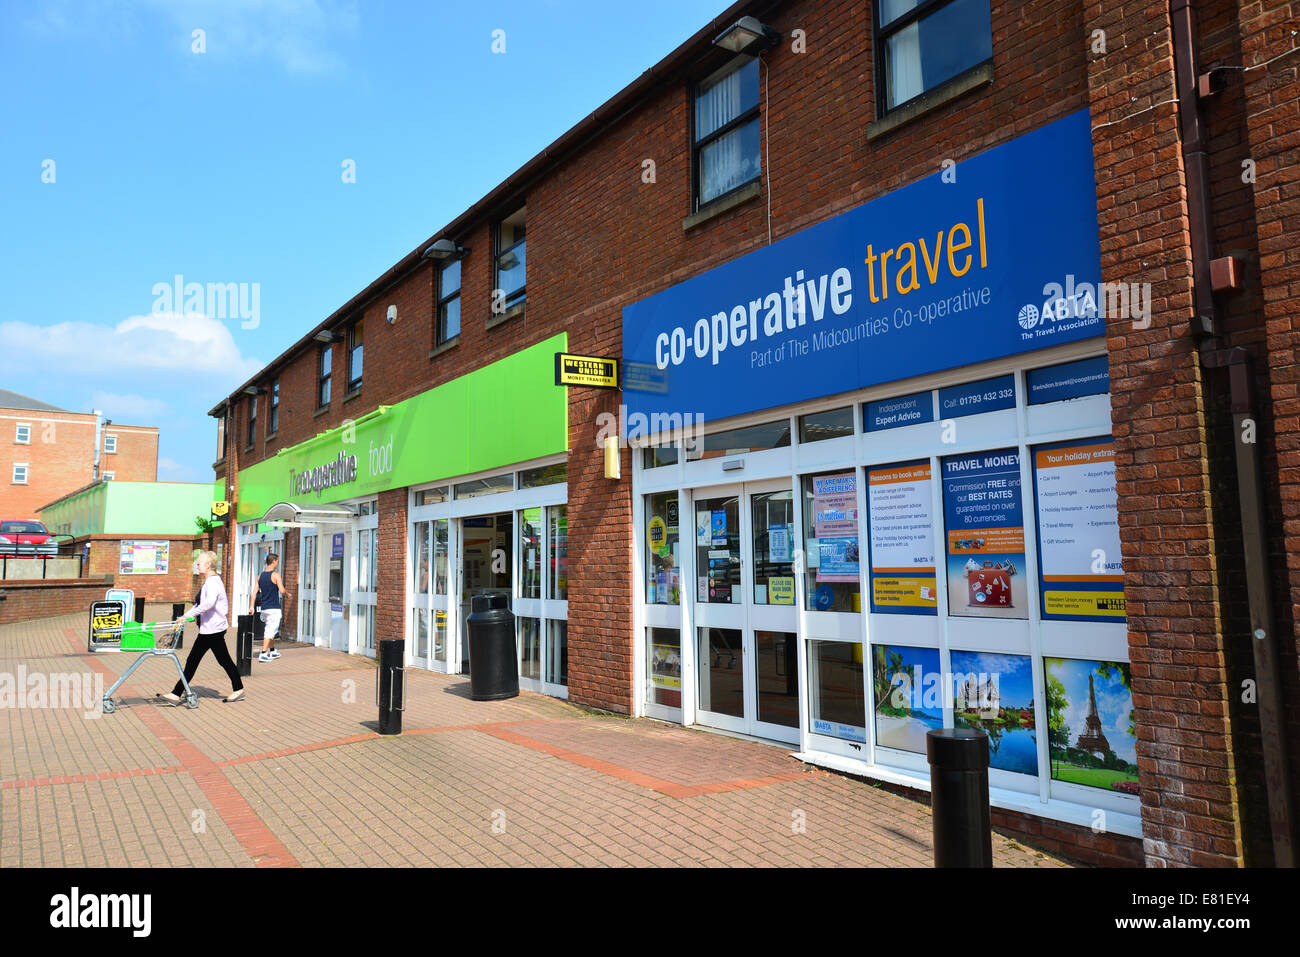 The Midcounties Co-operative Supermarket and Travel Agents, High Street, Old Town, Swindon, Wiltshire, England, United Kingdom Stock Photo